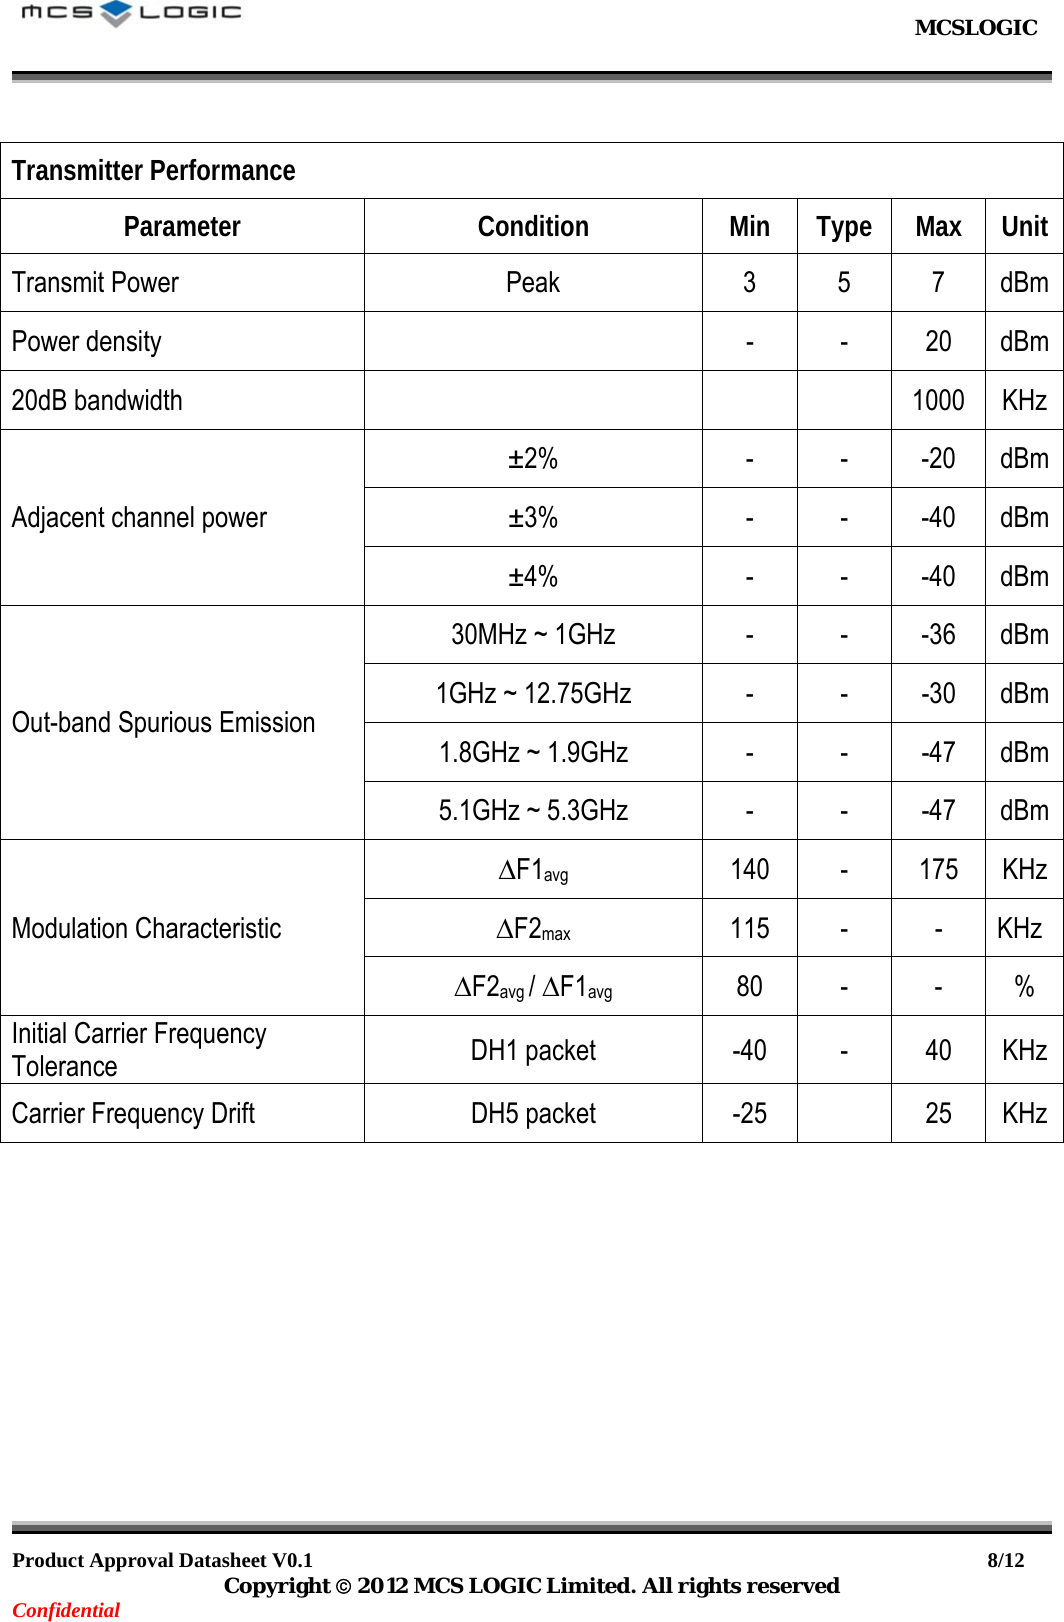                                                           MCSLOGIC                                                                                     Product Approval Datasheet V0.1                                                                  8/12 Copyright  2012 MCS LOGIC Limited. All rights reserved Confidential  Transmitter Performance Parameter Condition Min Type Max Unit Transmit Power  Peak  3  5  7  dBm Power density    -  -  20  dBm 20dB bandwidth        1000  KHz Adjacent channel power ±2% - - -20 dBm ±3% - - -40 dBm ±4% - - -40 dBm Out-band Spurious Emission 30MHz ~ 1GHz  -  -  -36  dBm 1GHz ~ 12.75GHz  -  -  -30  dBm 1.8GHz ~ 1.9GHz  -  -  -47  dBm 5.1GHz ~ 5.3GHz  -  -  -47  dBm Modulation Characteristic ∆F1avg  140 - 175 KHz ∆F2max 115 - - KHz ∆F2avg / ∆F1avg 80 - - % Initial Carrier Frequency Tolerance  DH1 packet  -40  -  40  KHz Carrier Frequency Drift  DH5 packet  -25    25  KHz     